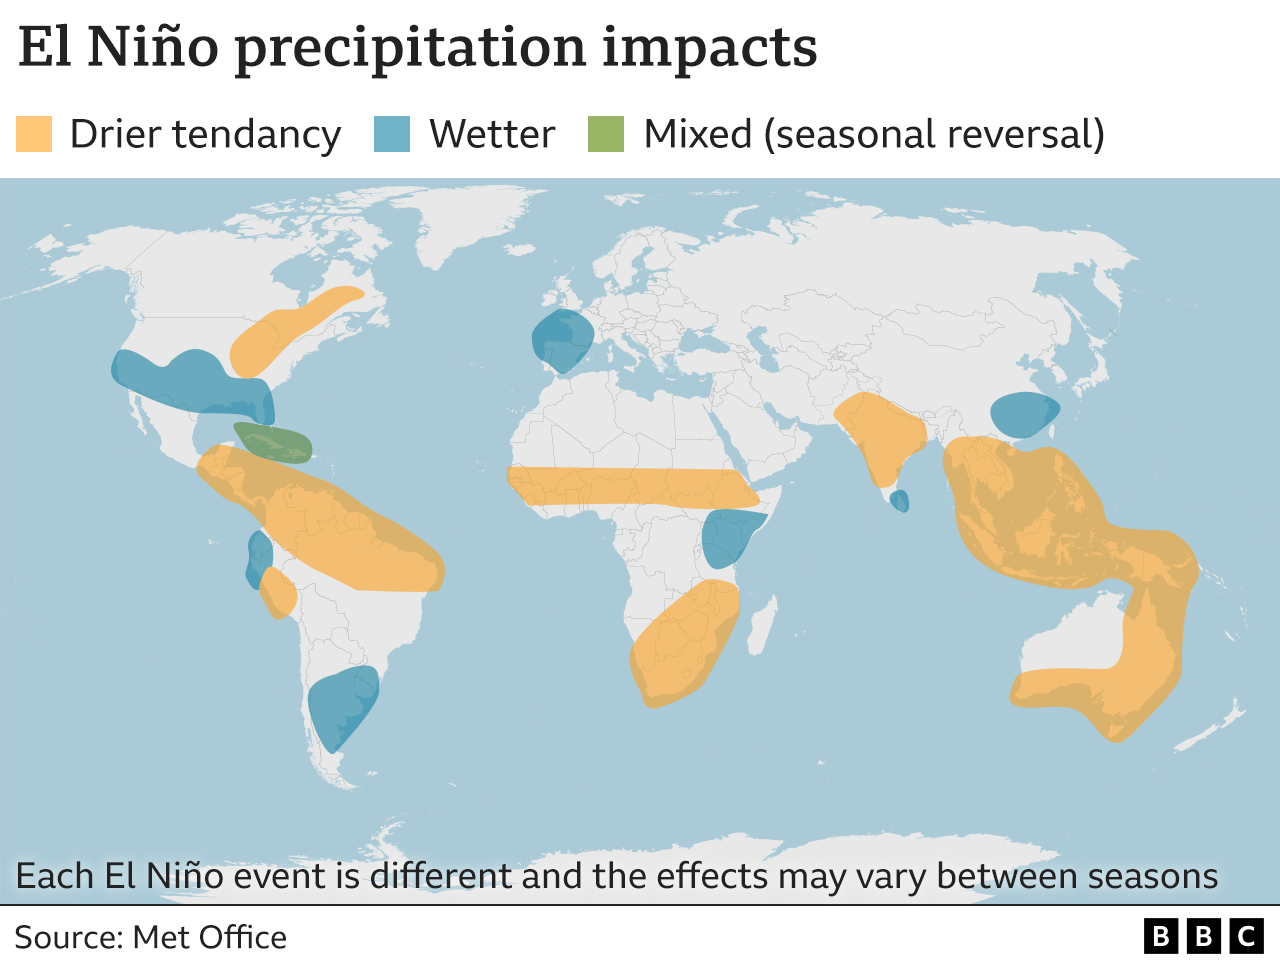 Typical effects of El Nino events on precipitation patterns for each region. Key trends are drying in many equatorial regions (northern South America, central Africa, southeast Asia and Australia). Southern USA generally becomes wetter than normal. [June 2023]